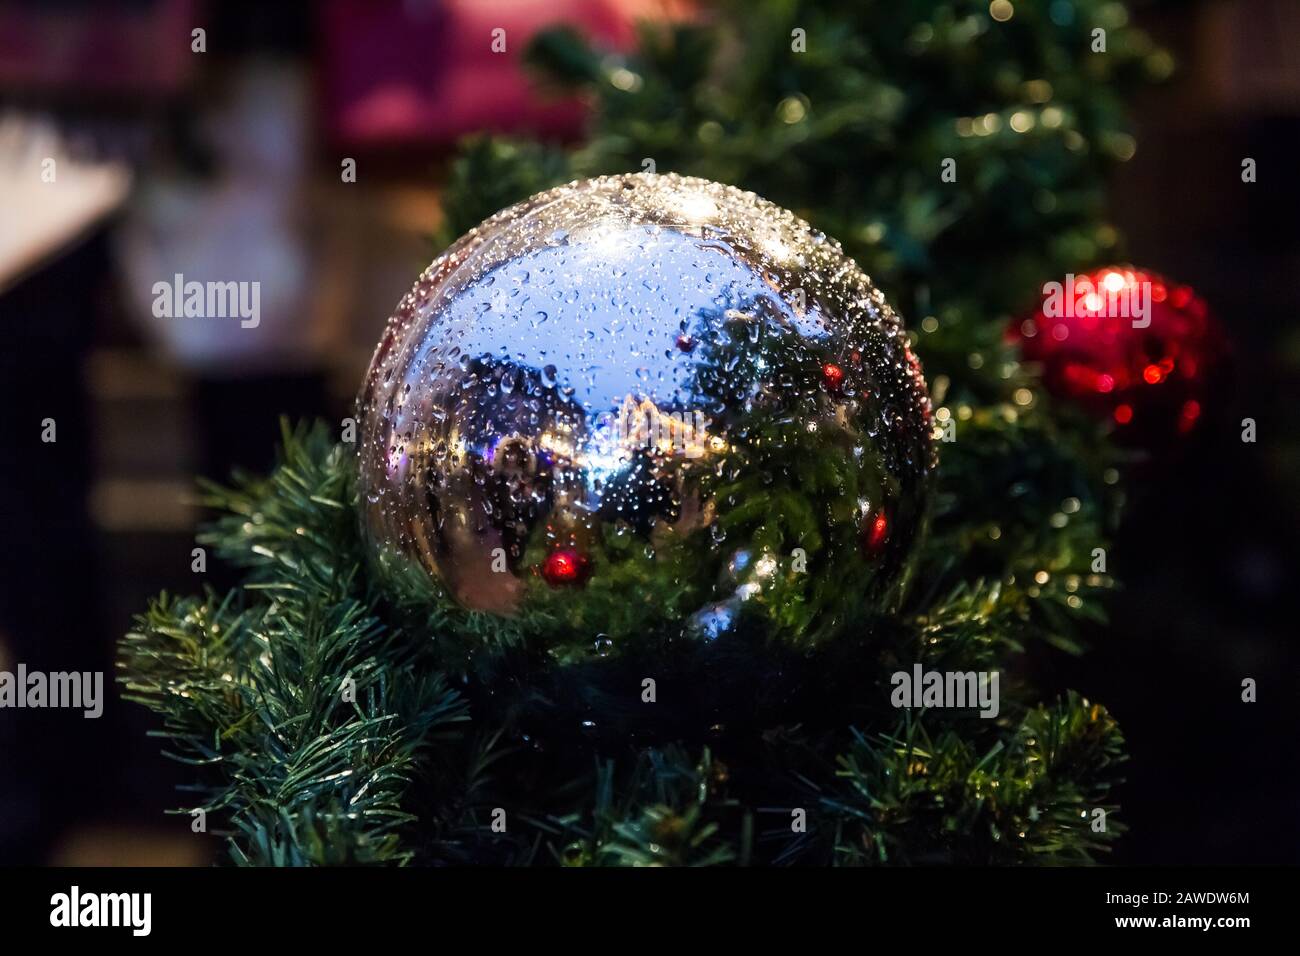 Closeup of red bauble hanging from a decorated Christmas tree. Stock Photo